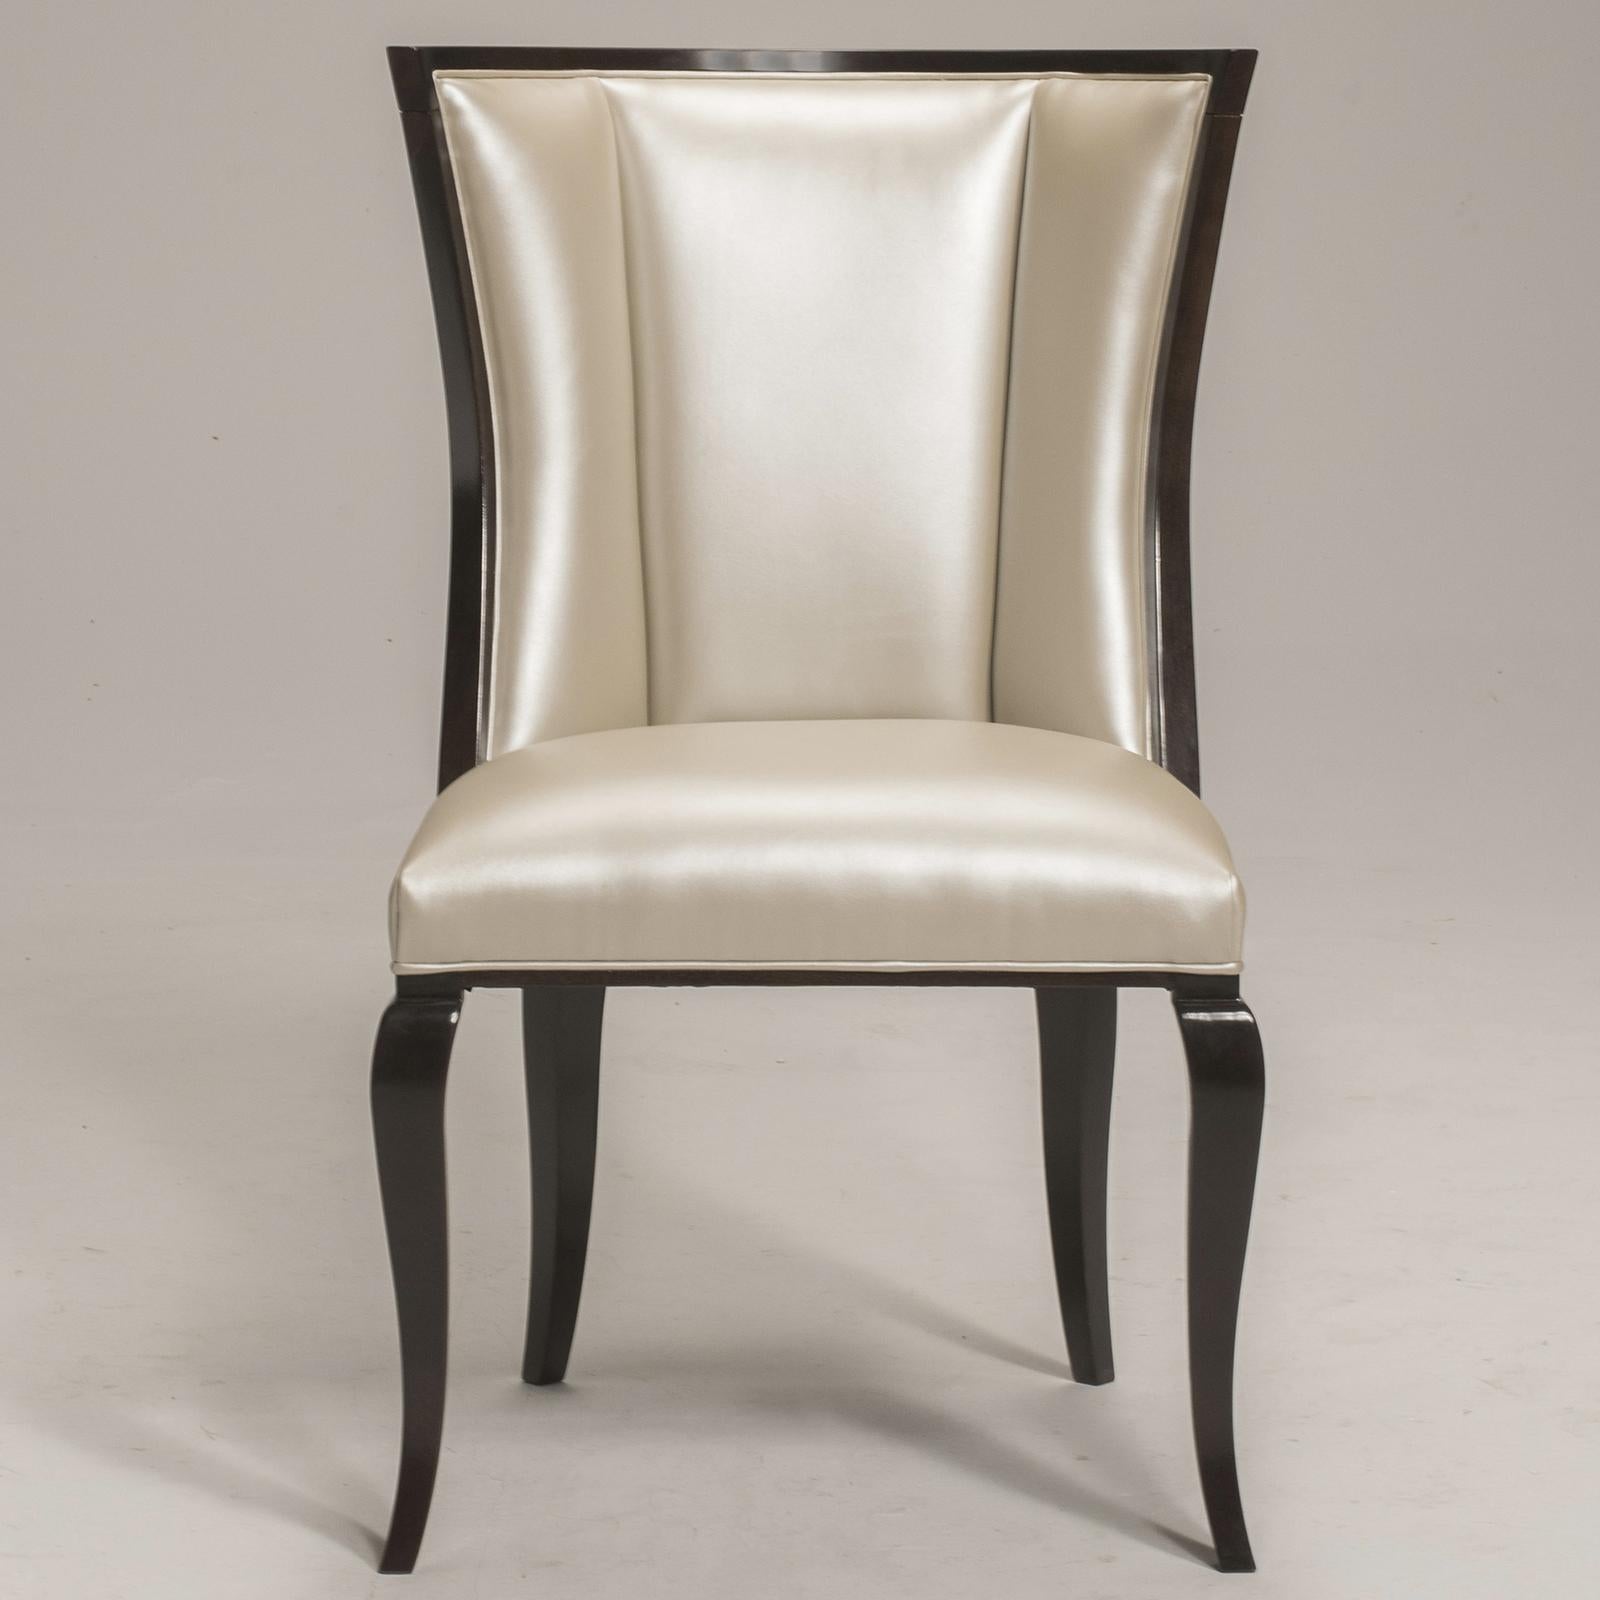 A luxuriously delightful addition to any decor in the home with an elegant and cosmopolitan flavor, this Oscar Collection Chair combines tradition and modernity with deluxe elements in wood and fabric of superb quality. The stunning beige-toned